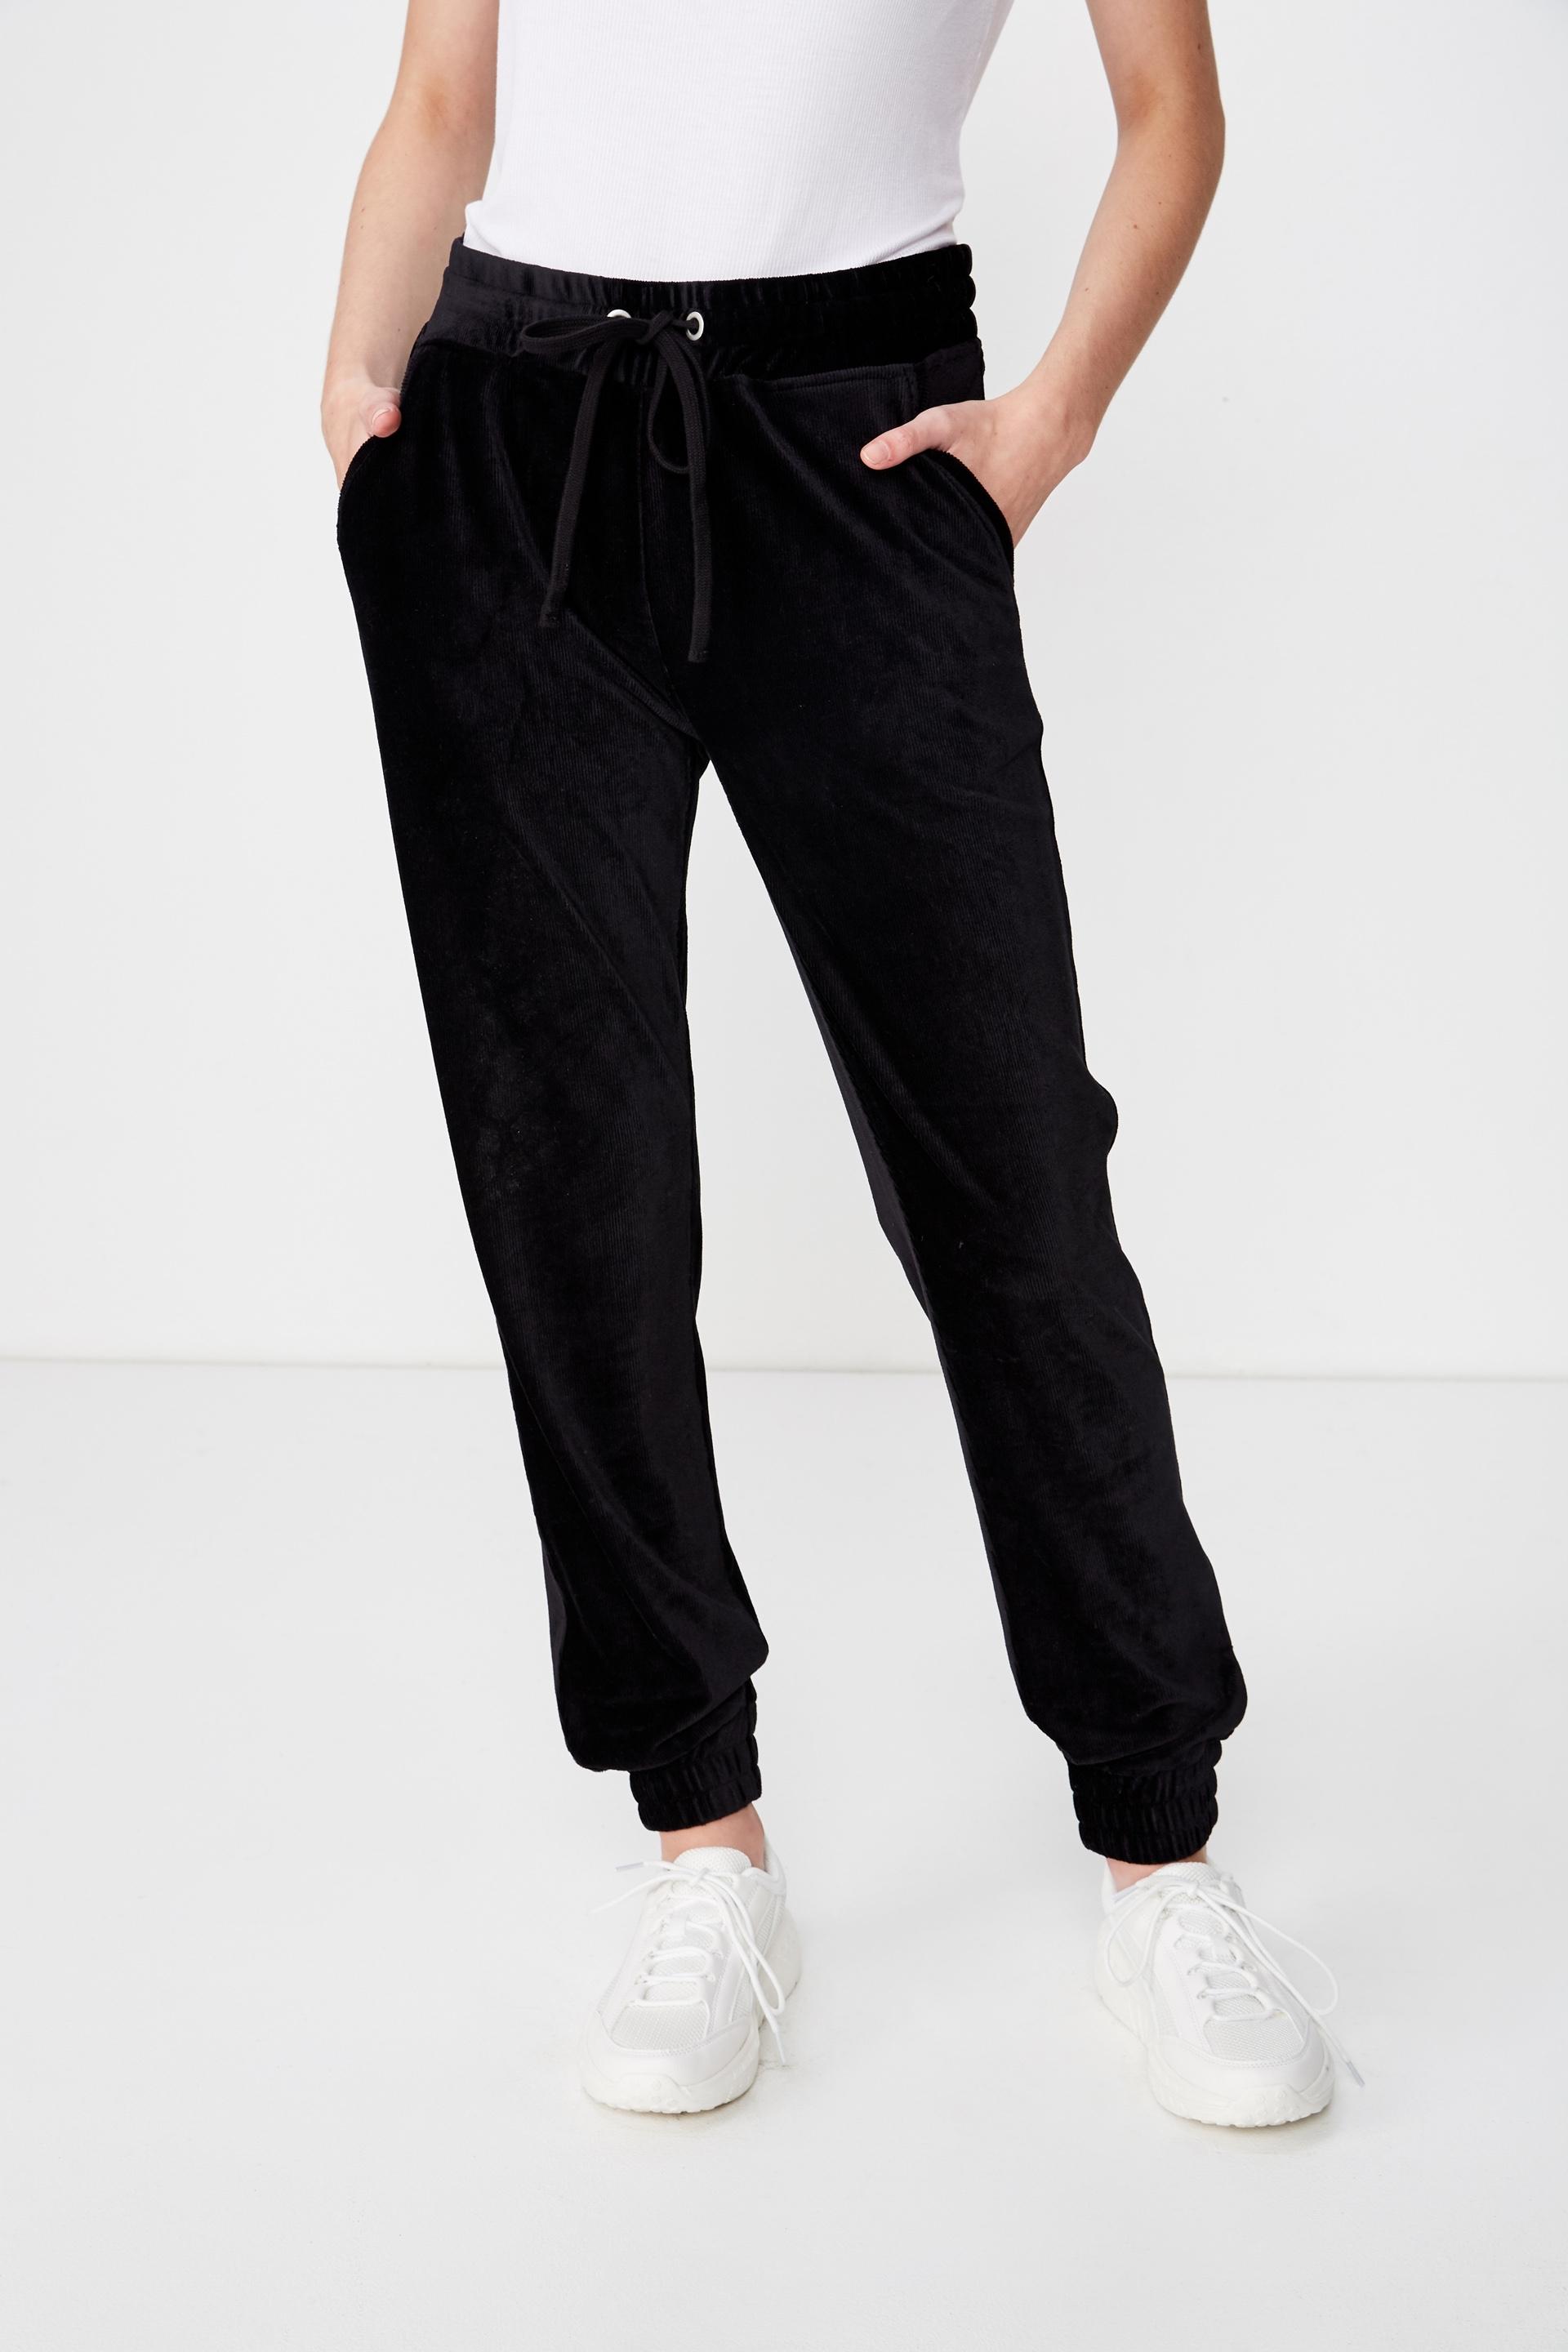 Willow fashion trackie - black Cotton On Bottoms | Superbalist.com